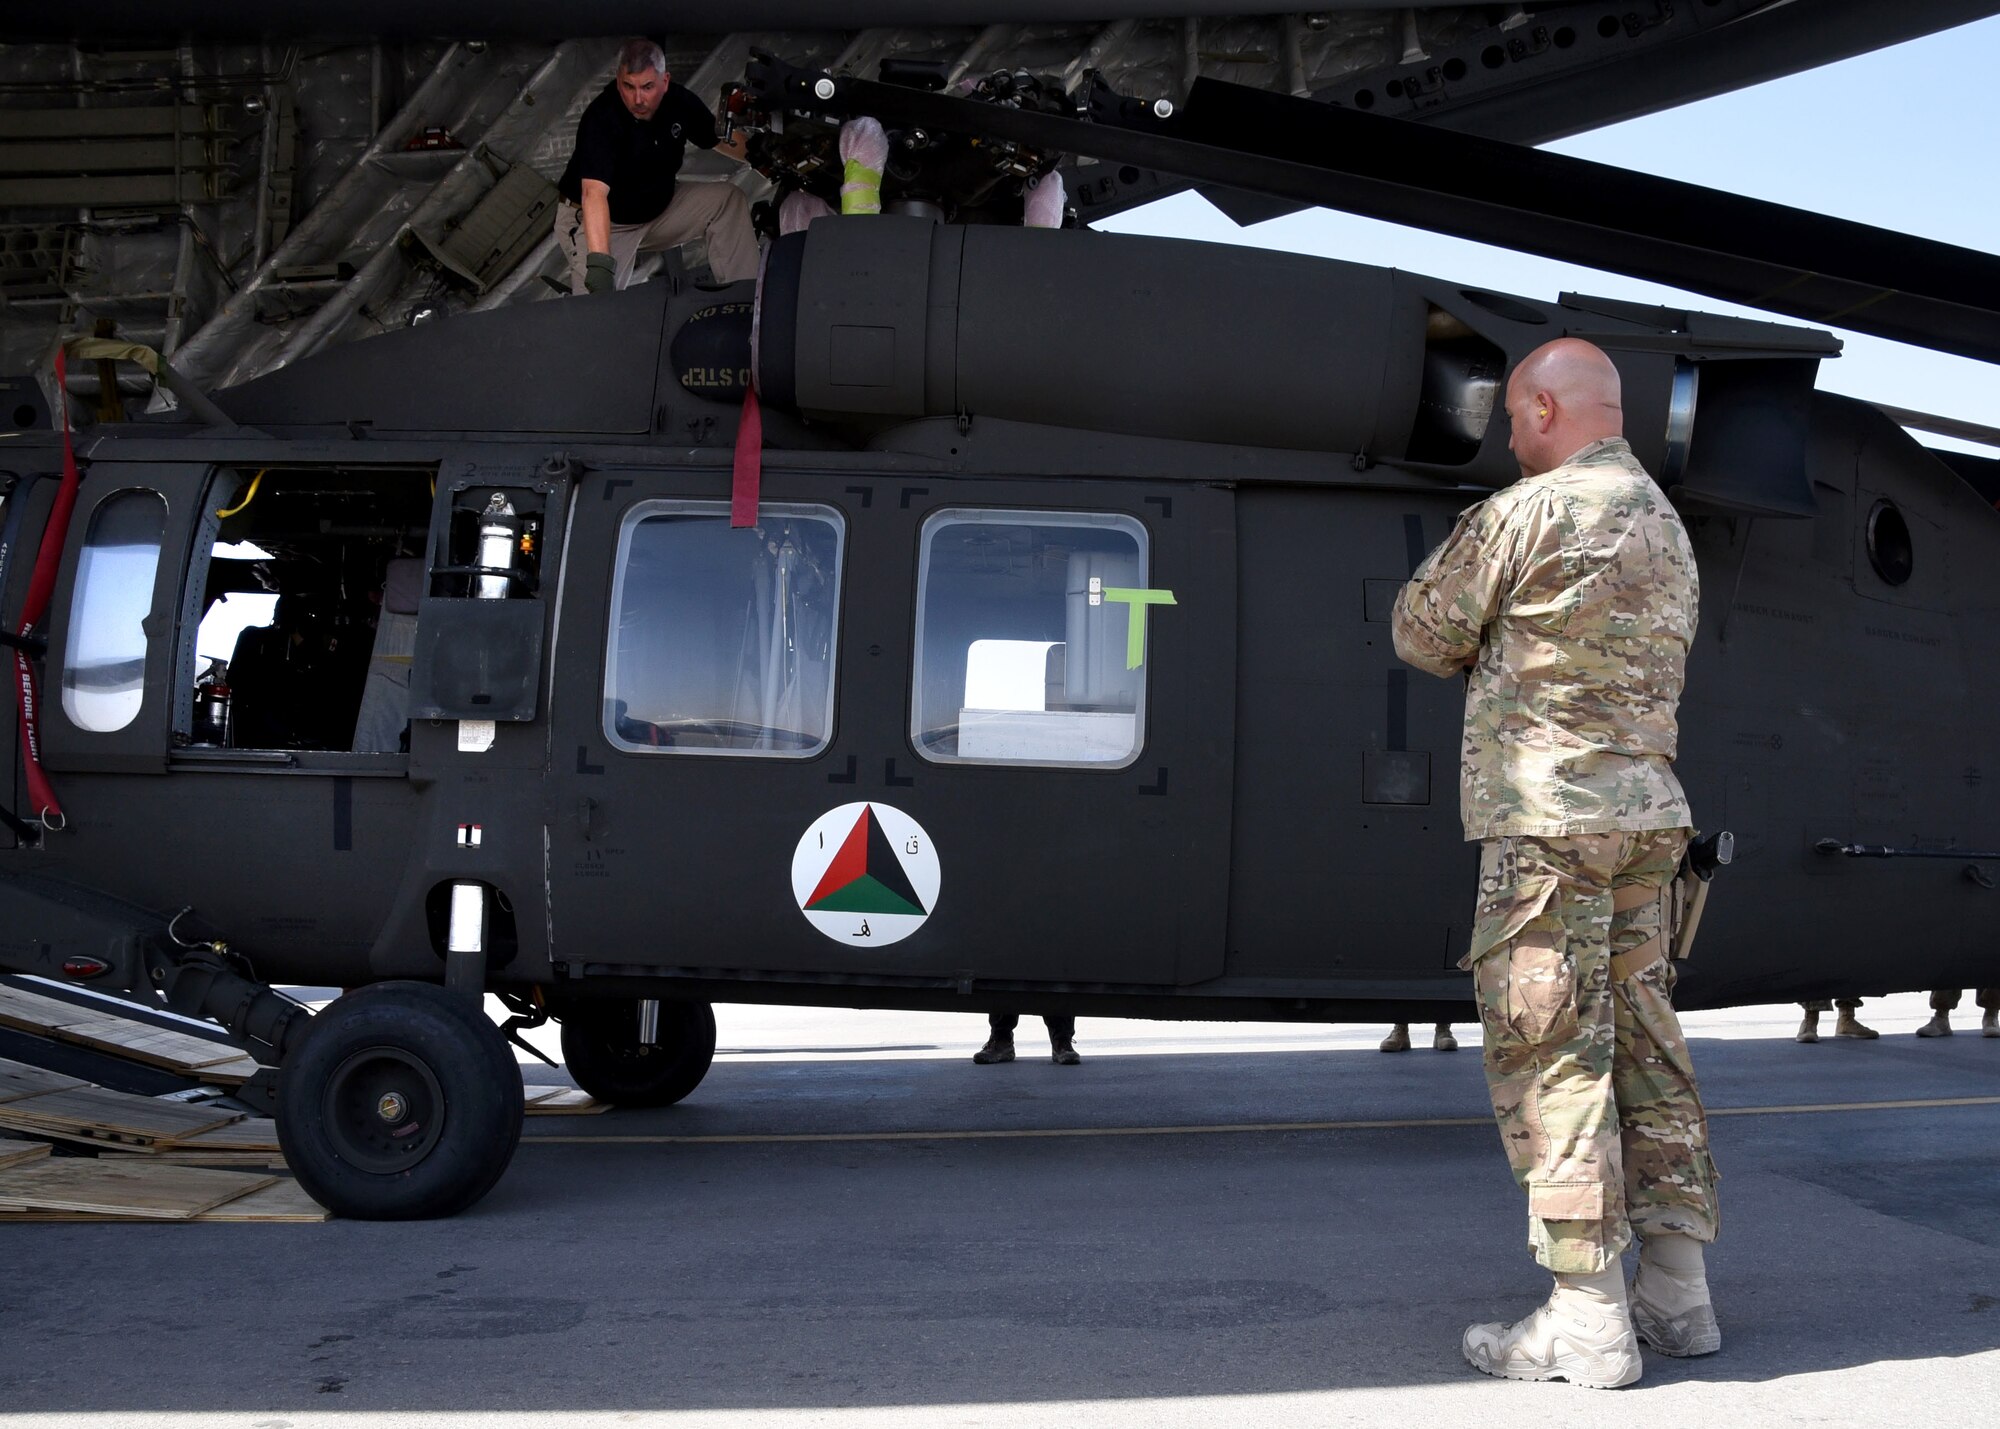 U.S. Air Force Col. Armando Fiterre, the 738th Air Expeditionary Advisory Group commander, Train, Advise, Assist, Command-Air, watches as the first Afghan Air Force UH-60 helicopter is unloaded off a U.S. Air Force C-17 Globemaster, Sept. 18, 2017, at Kandahar Air Field, Afghanistan. The UH-60 arrival is part of the recapitalization efforts of the AAF. The plan involves seven different weapon systems, 14 program offices and more than 20 major contracts. TAAC-Air will oversee training of AAF pilots and maintainers. (U.S. Air Force photo by Tech. Sgt. Veronica Pierce)